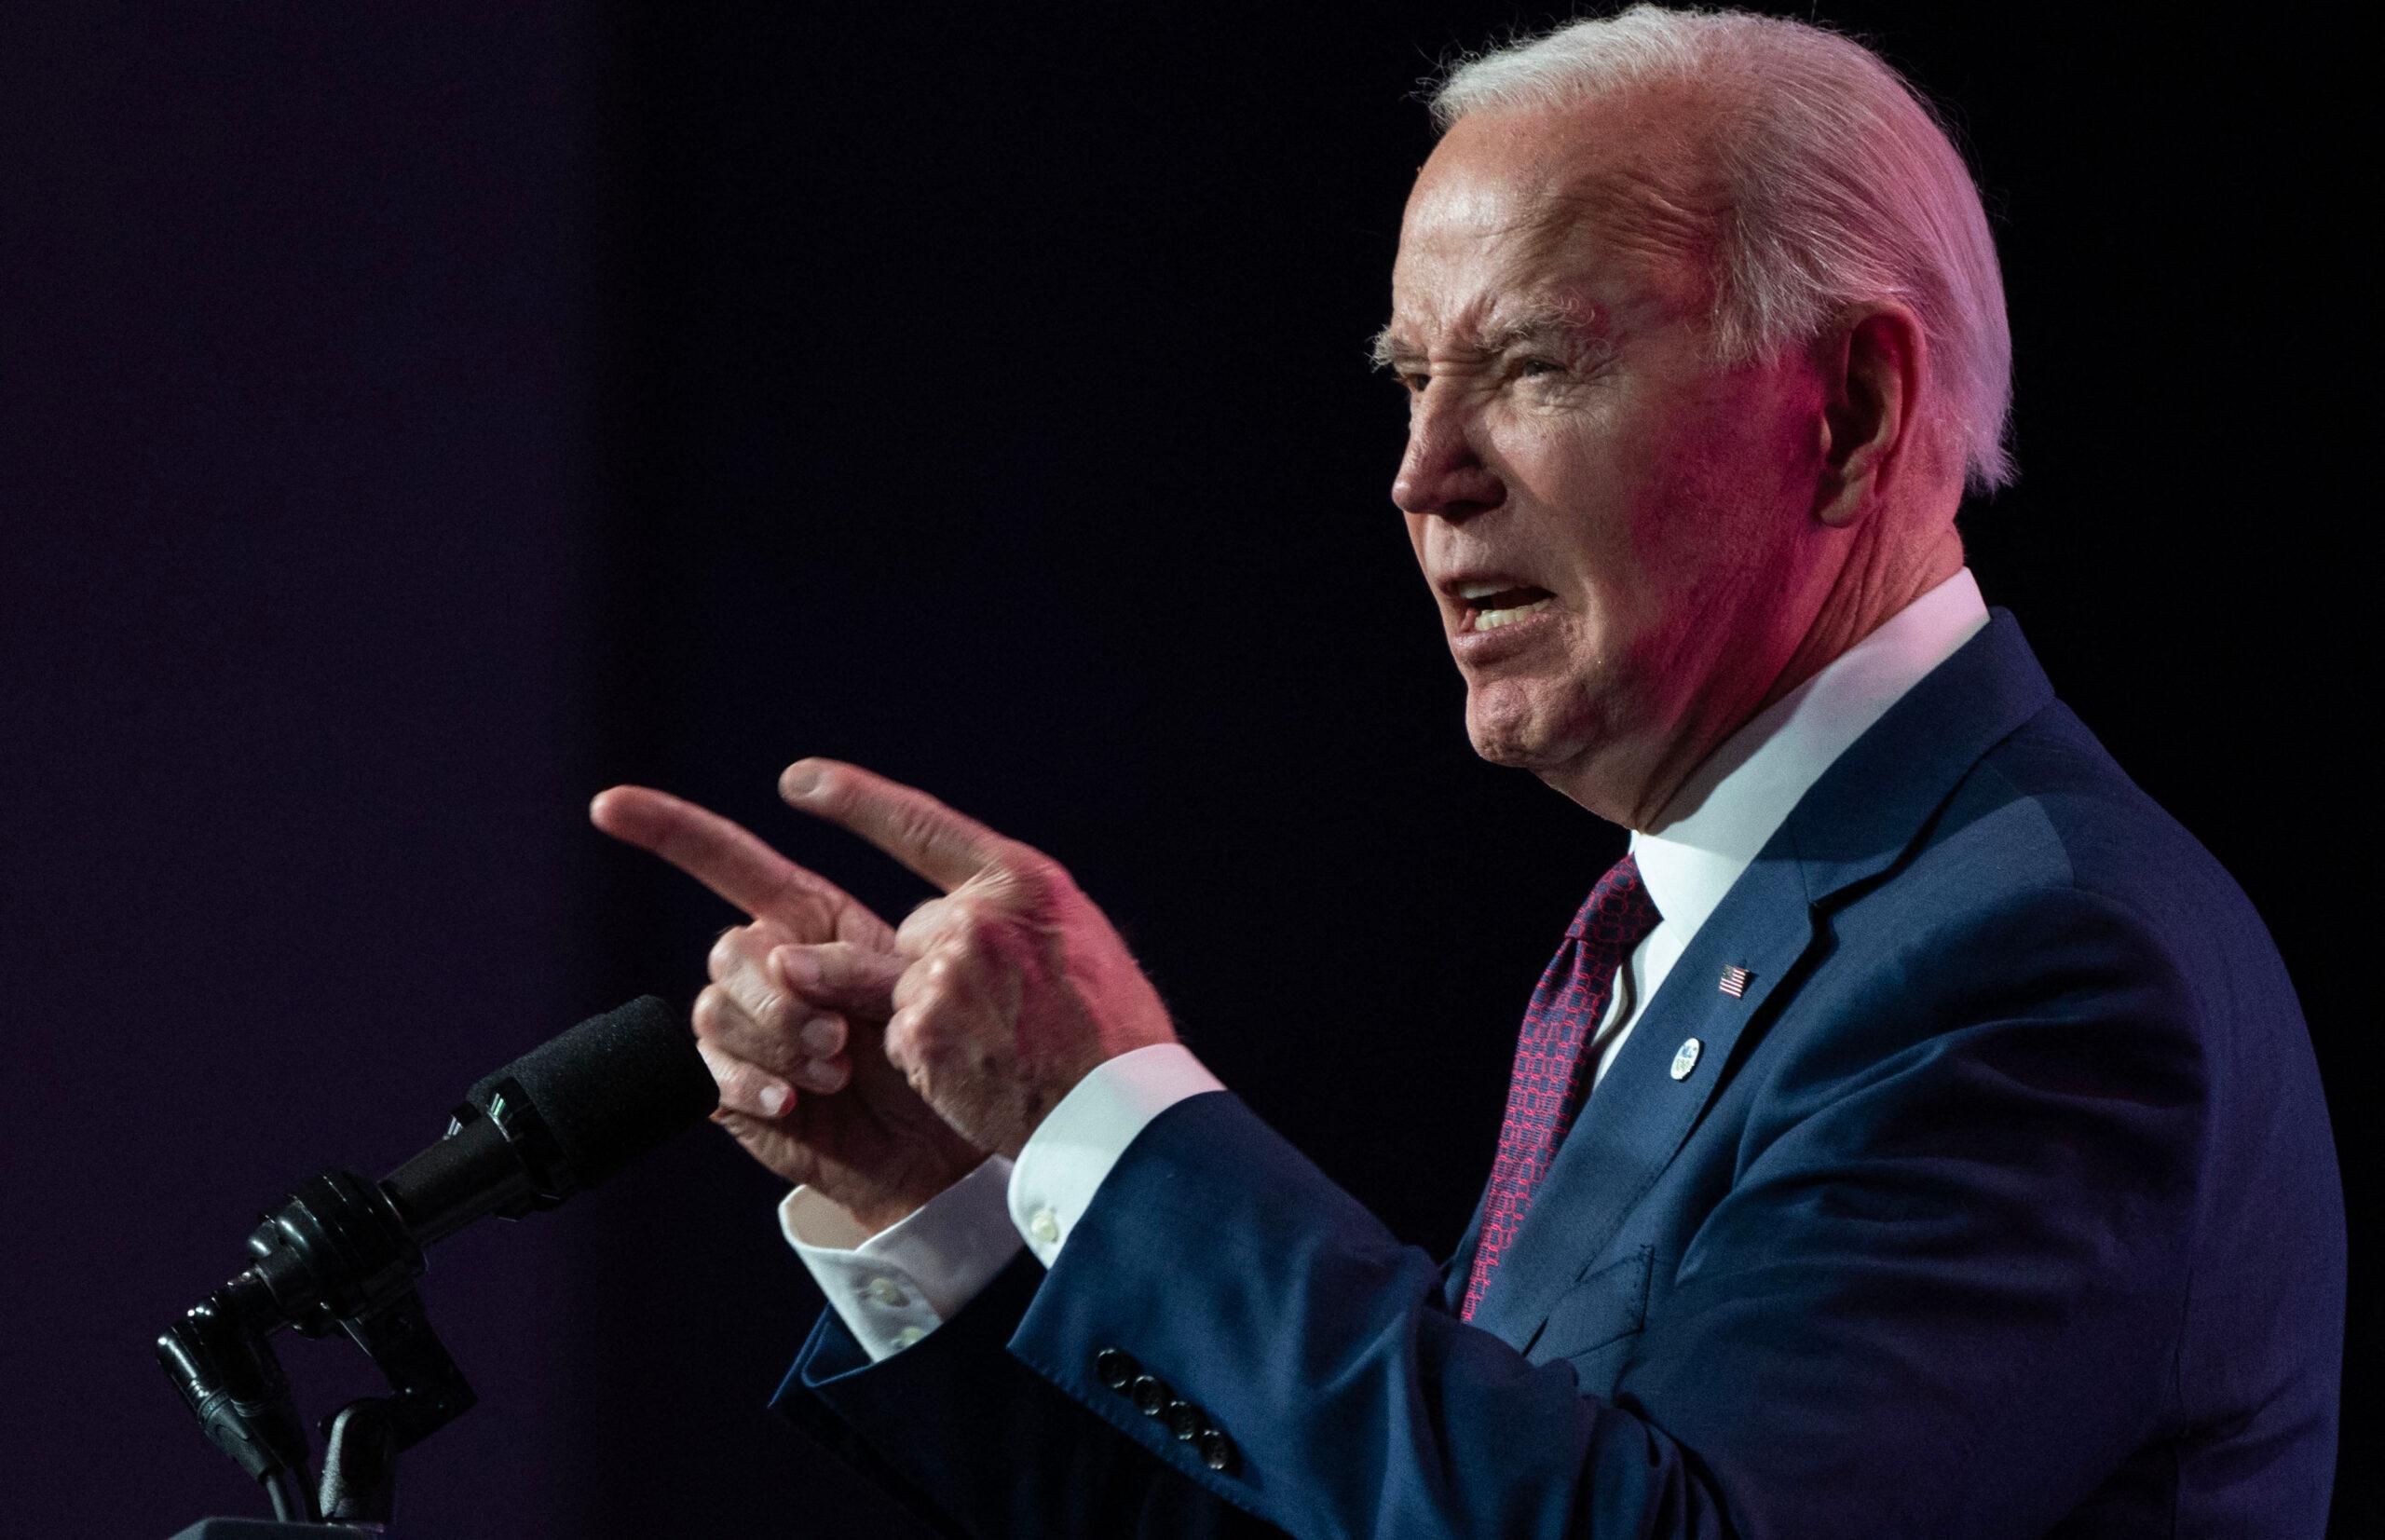 Biden Administration Takes 'Major Step' To Help Americans From 'Getting Ripped Off'